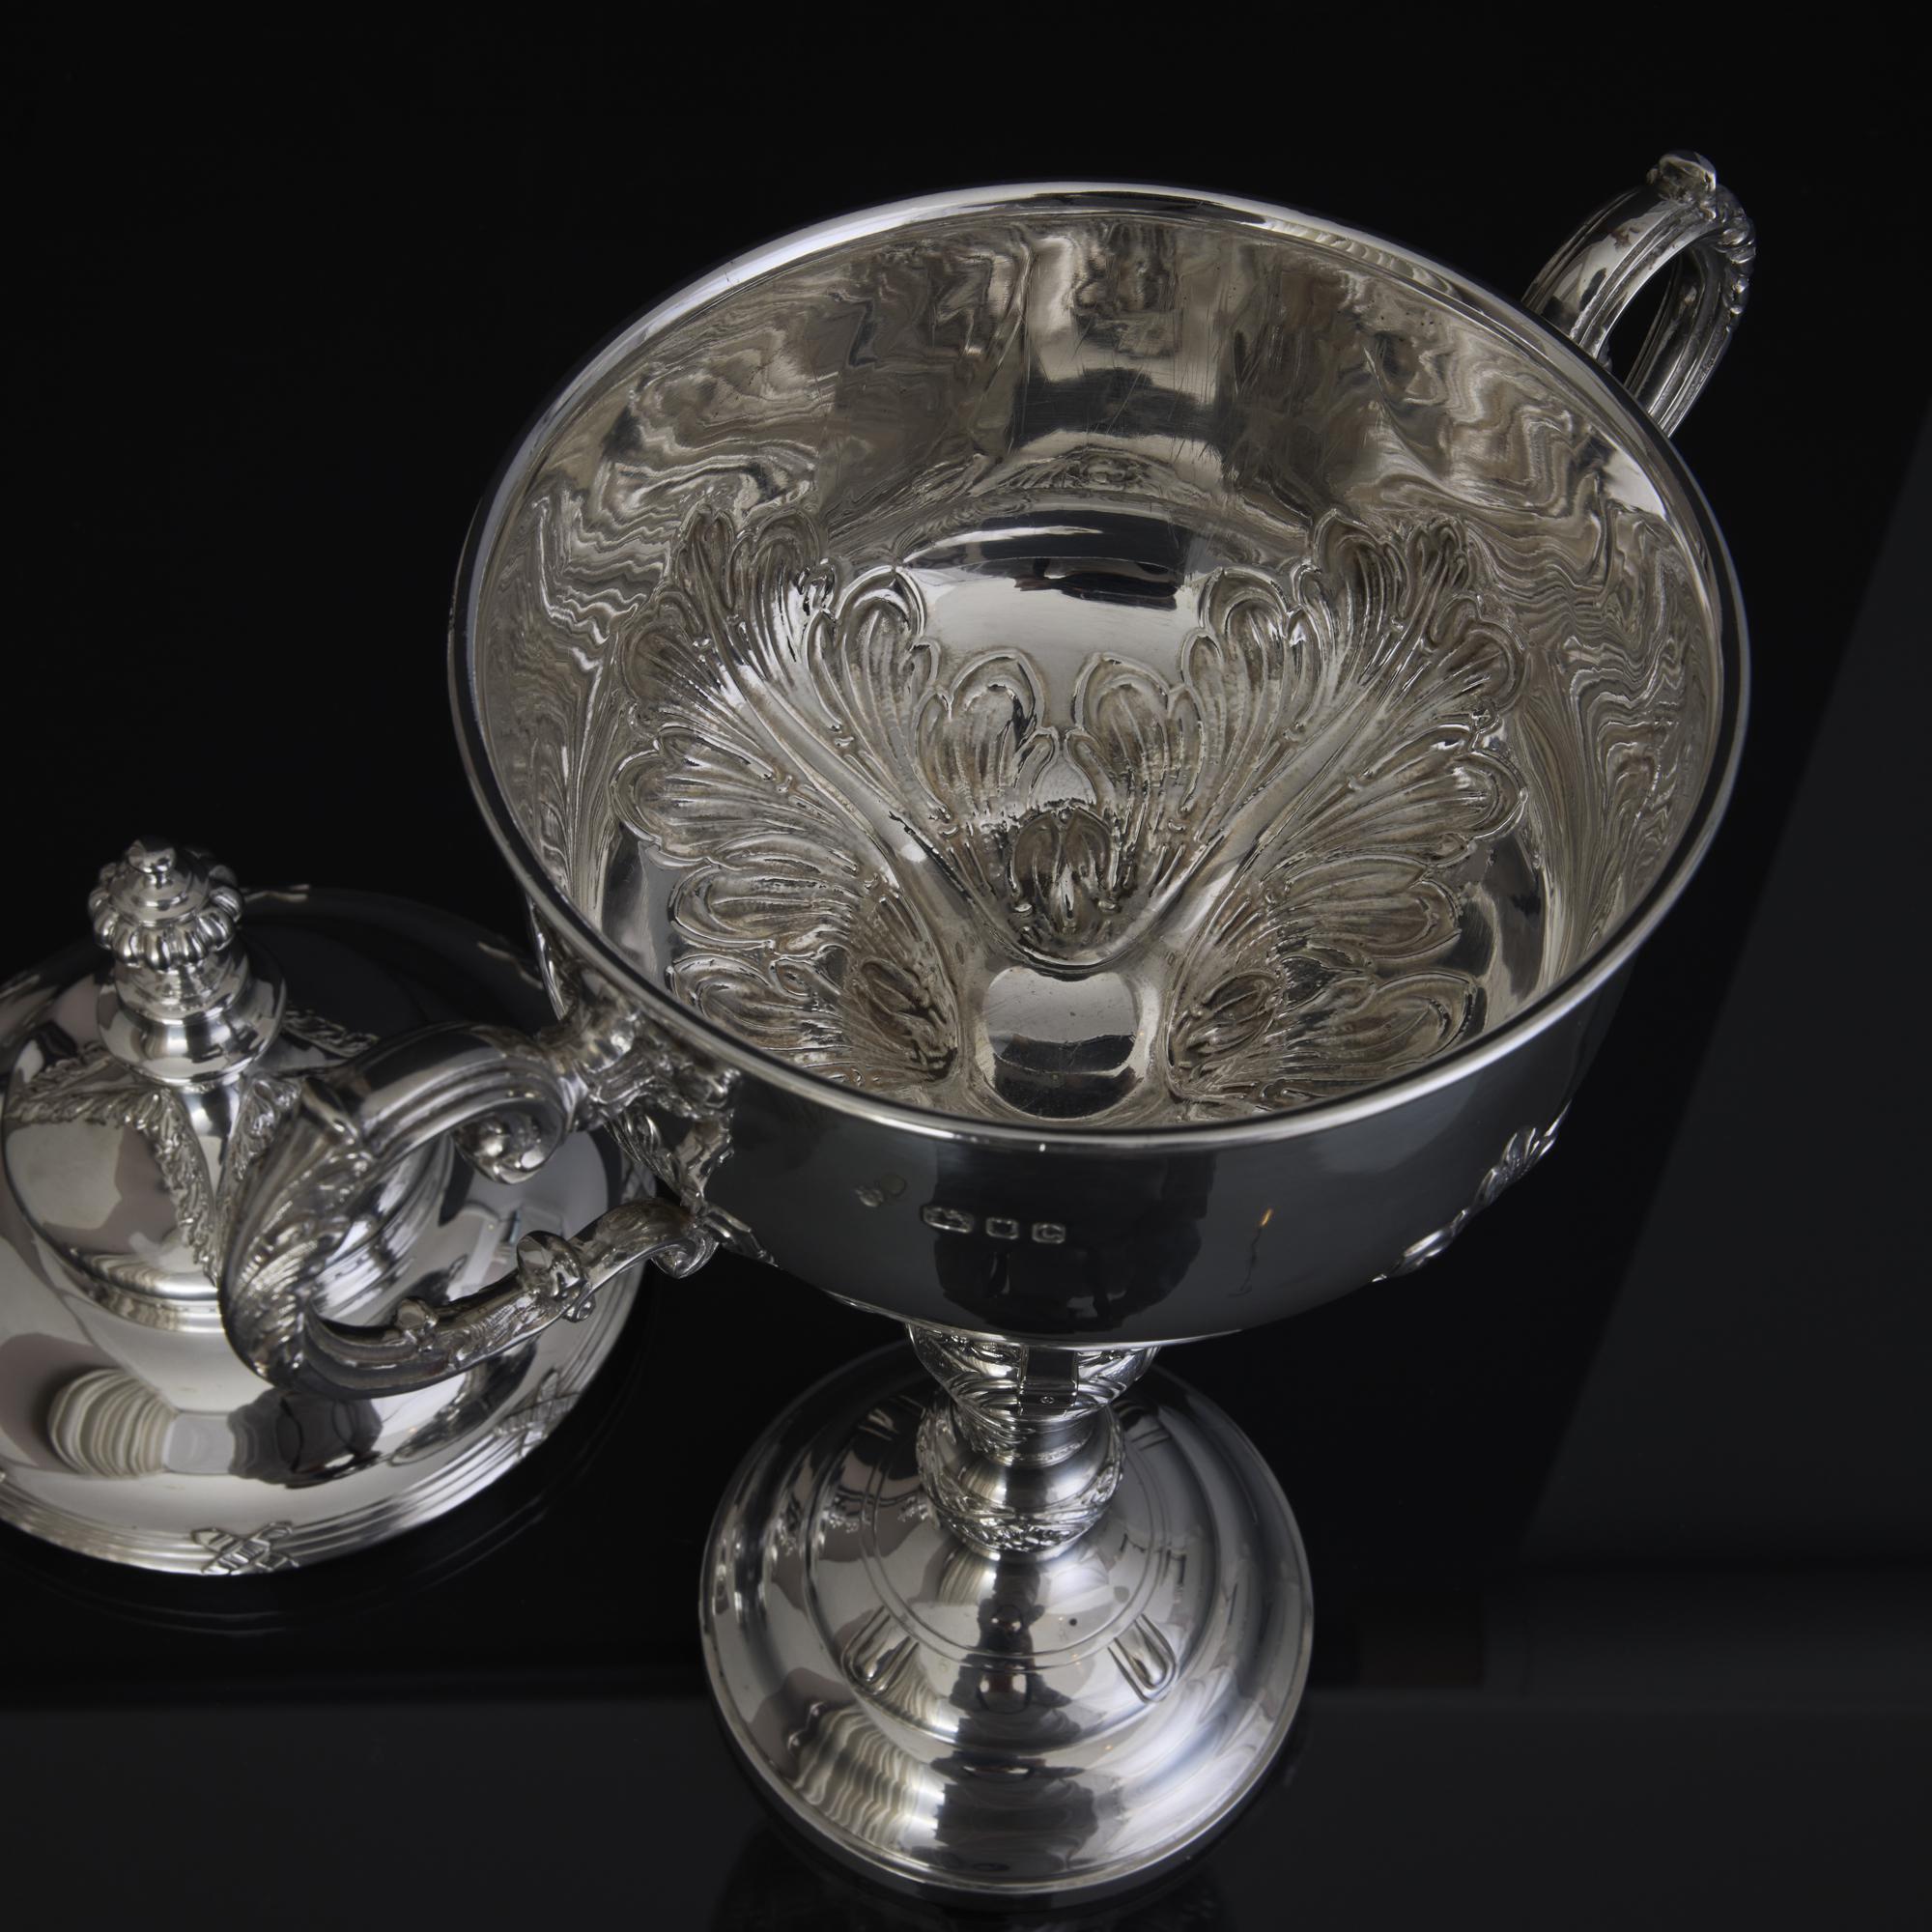 Two-handled handmade silver trophy cup & cover For Sale 2